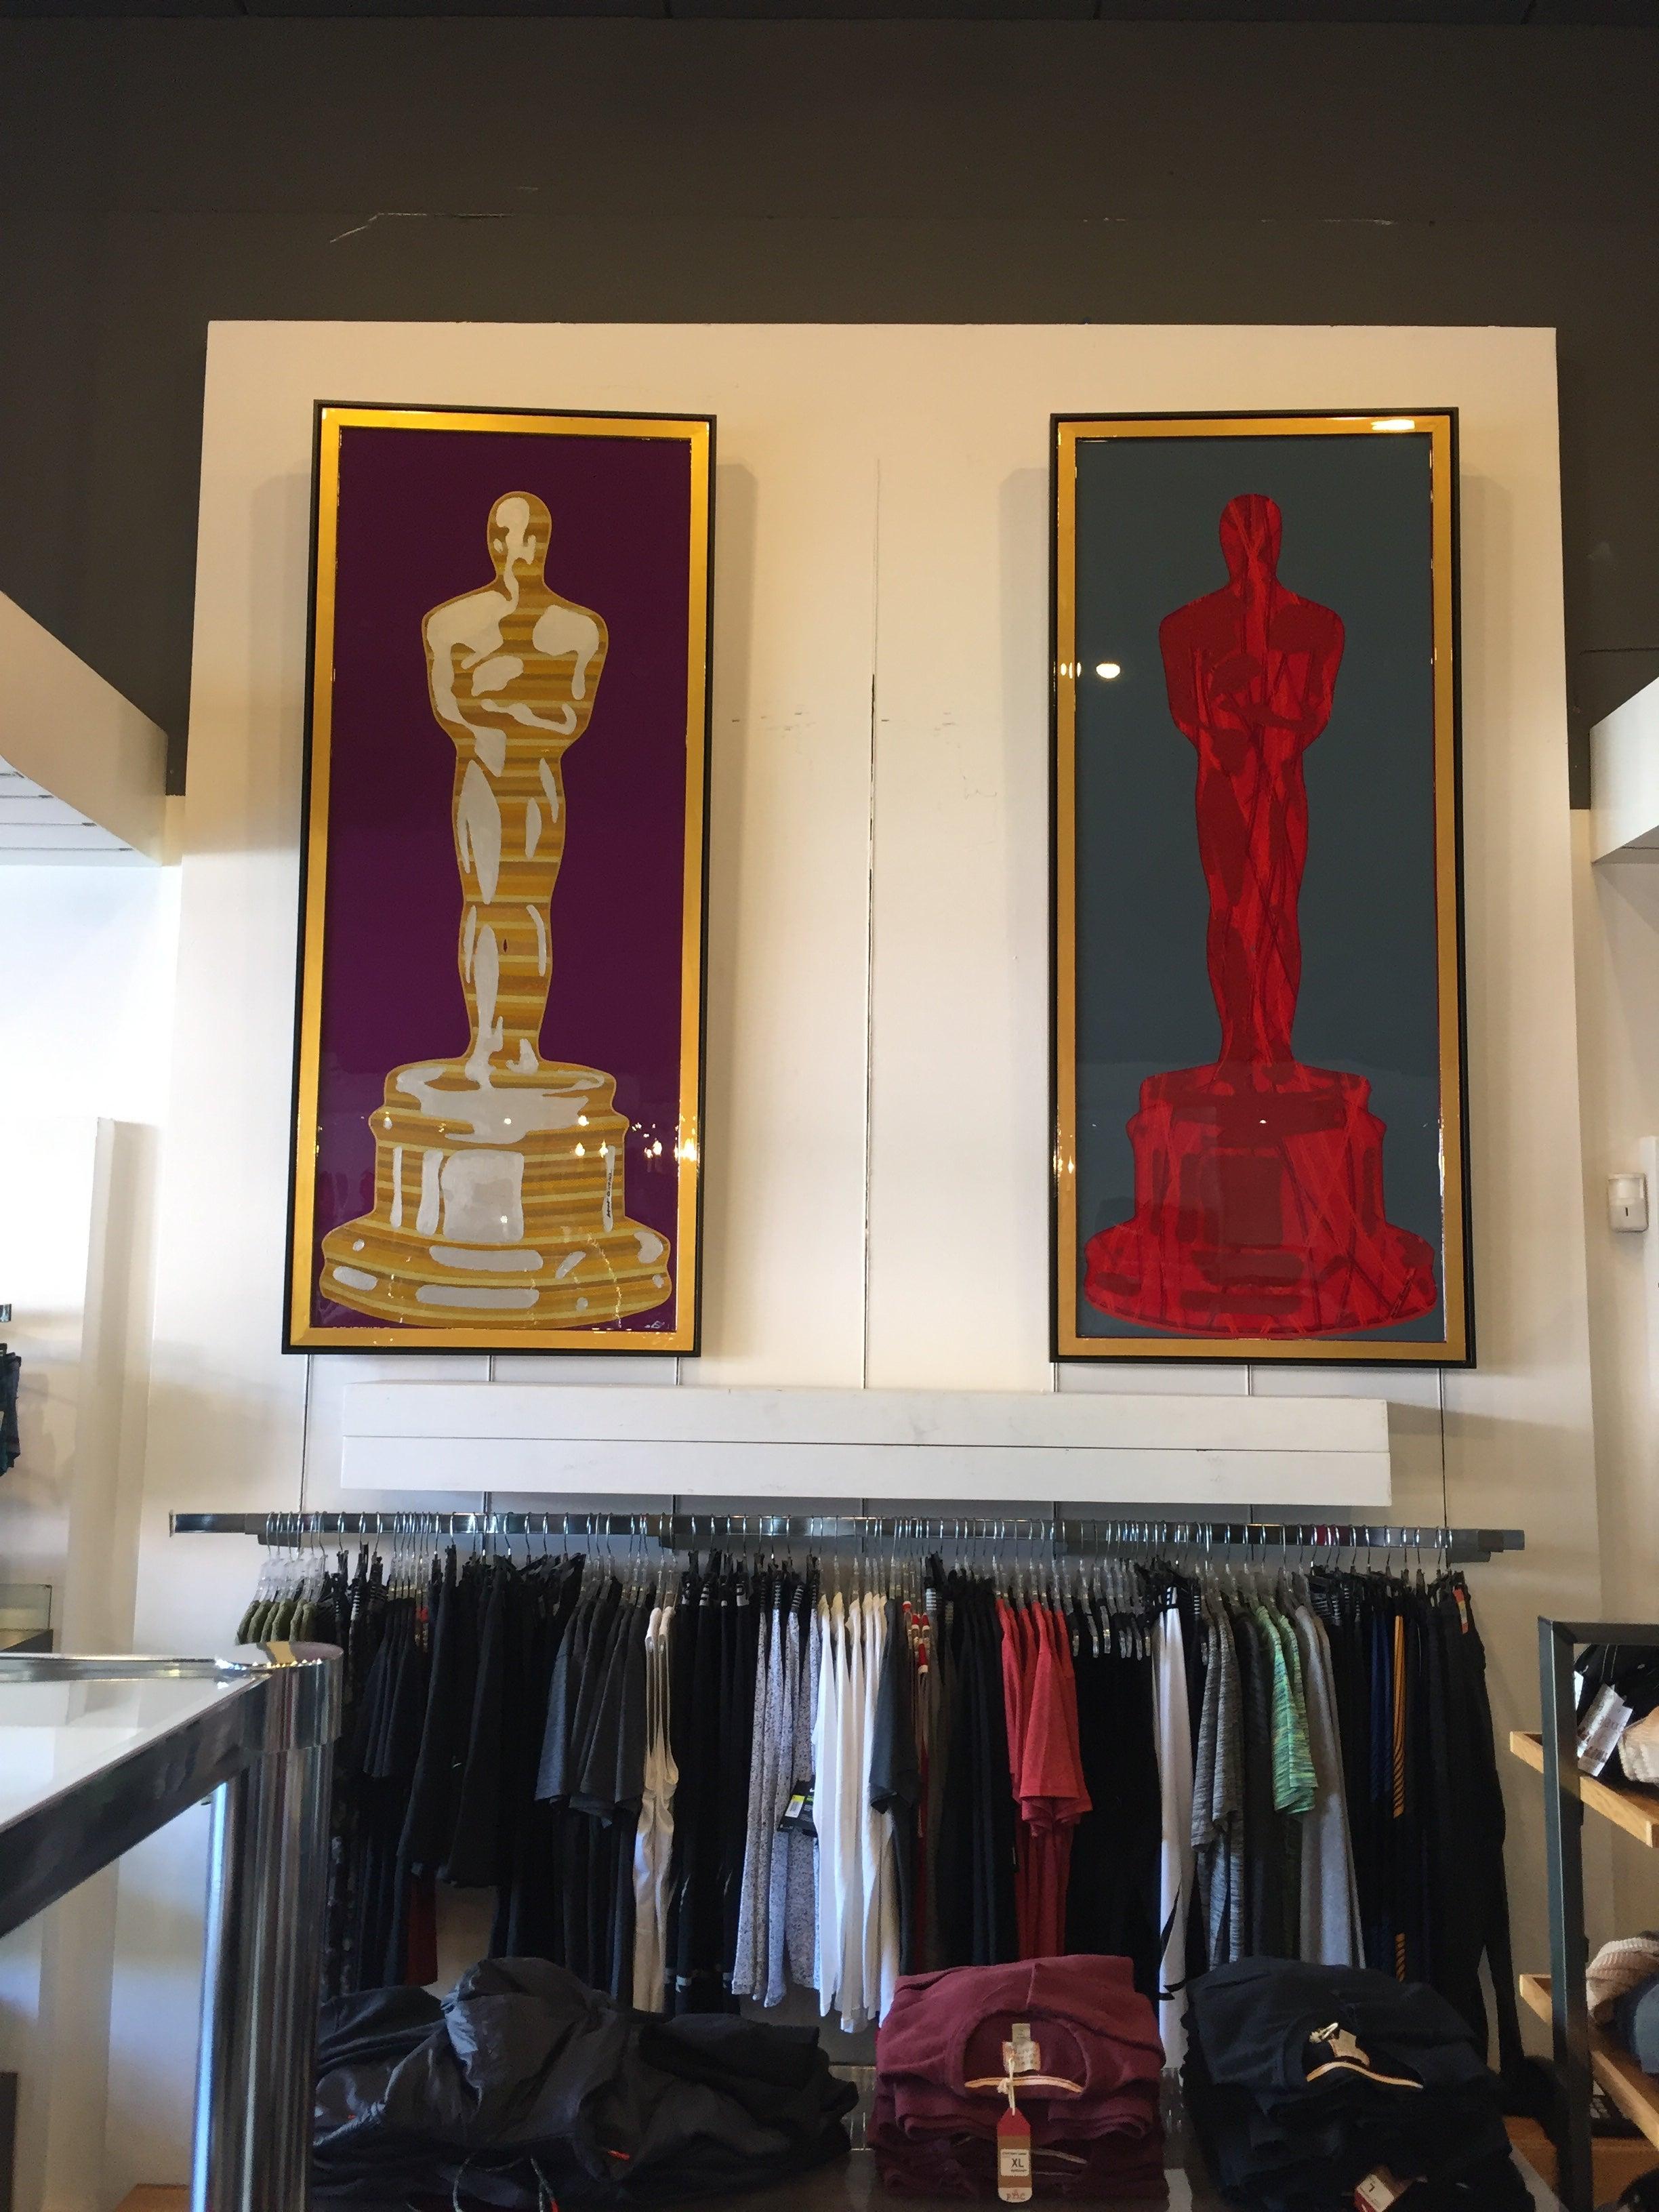 Celebrating the Academy with this Limited Oscar Art Series by Mauro Oliveira. 

Limited edition of 30 museum quality giclee prints on CANVAS, signed and numbered by the artist. 
A 